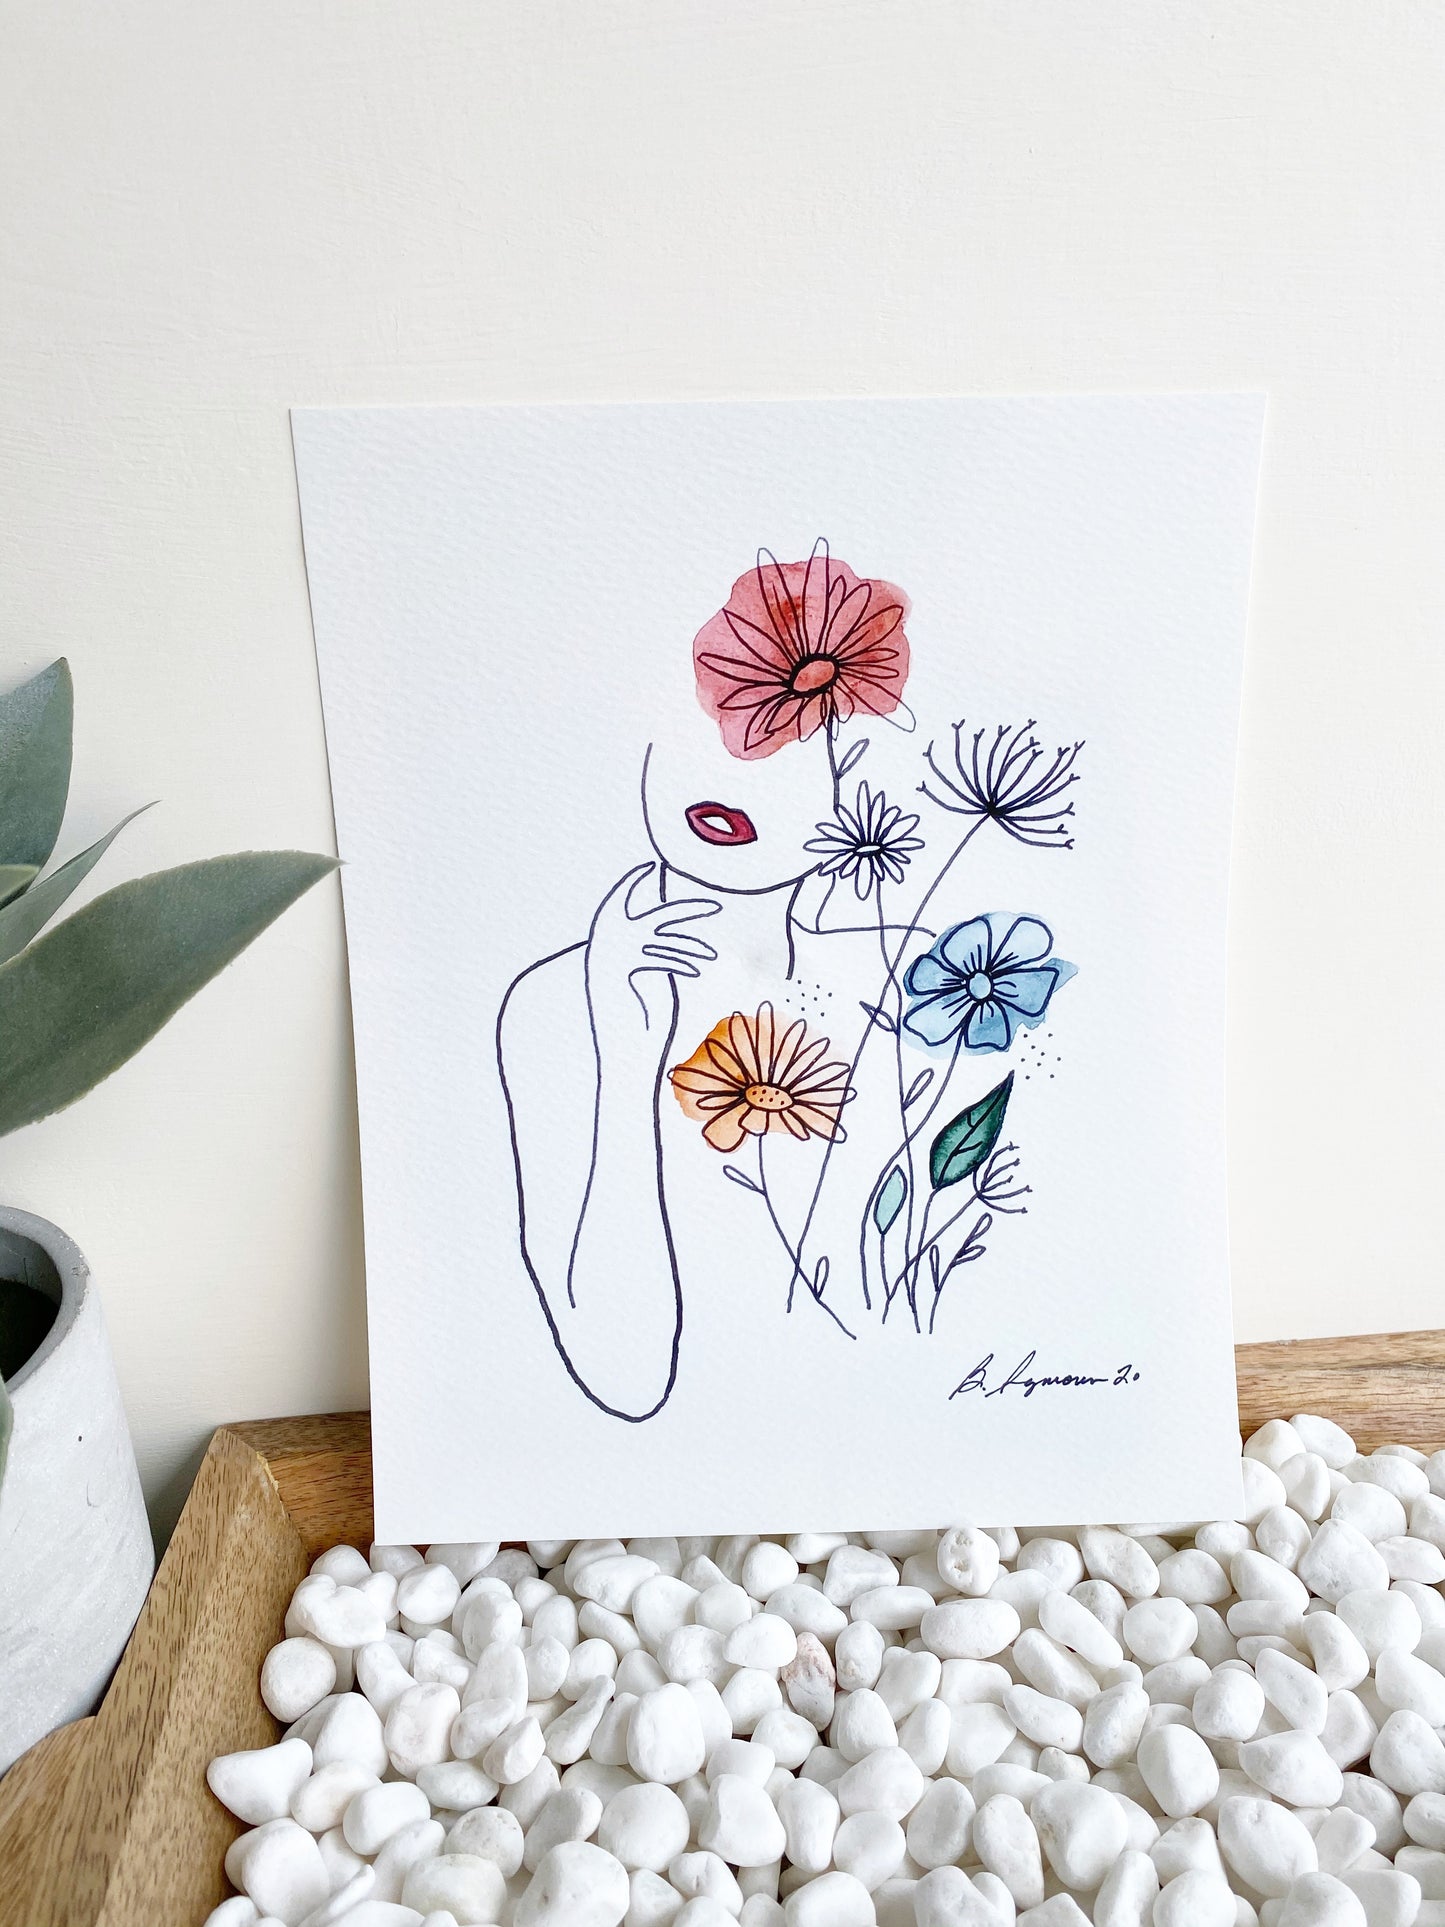 Art print of outline of a woman's face and arm as well as a floral arrangement with watercolor accents. Print sits on wooden tray filled with white pebbles against white wall